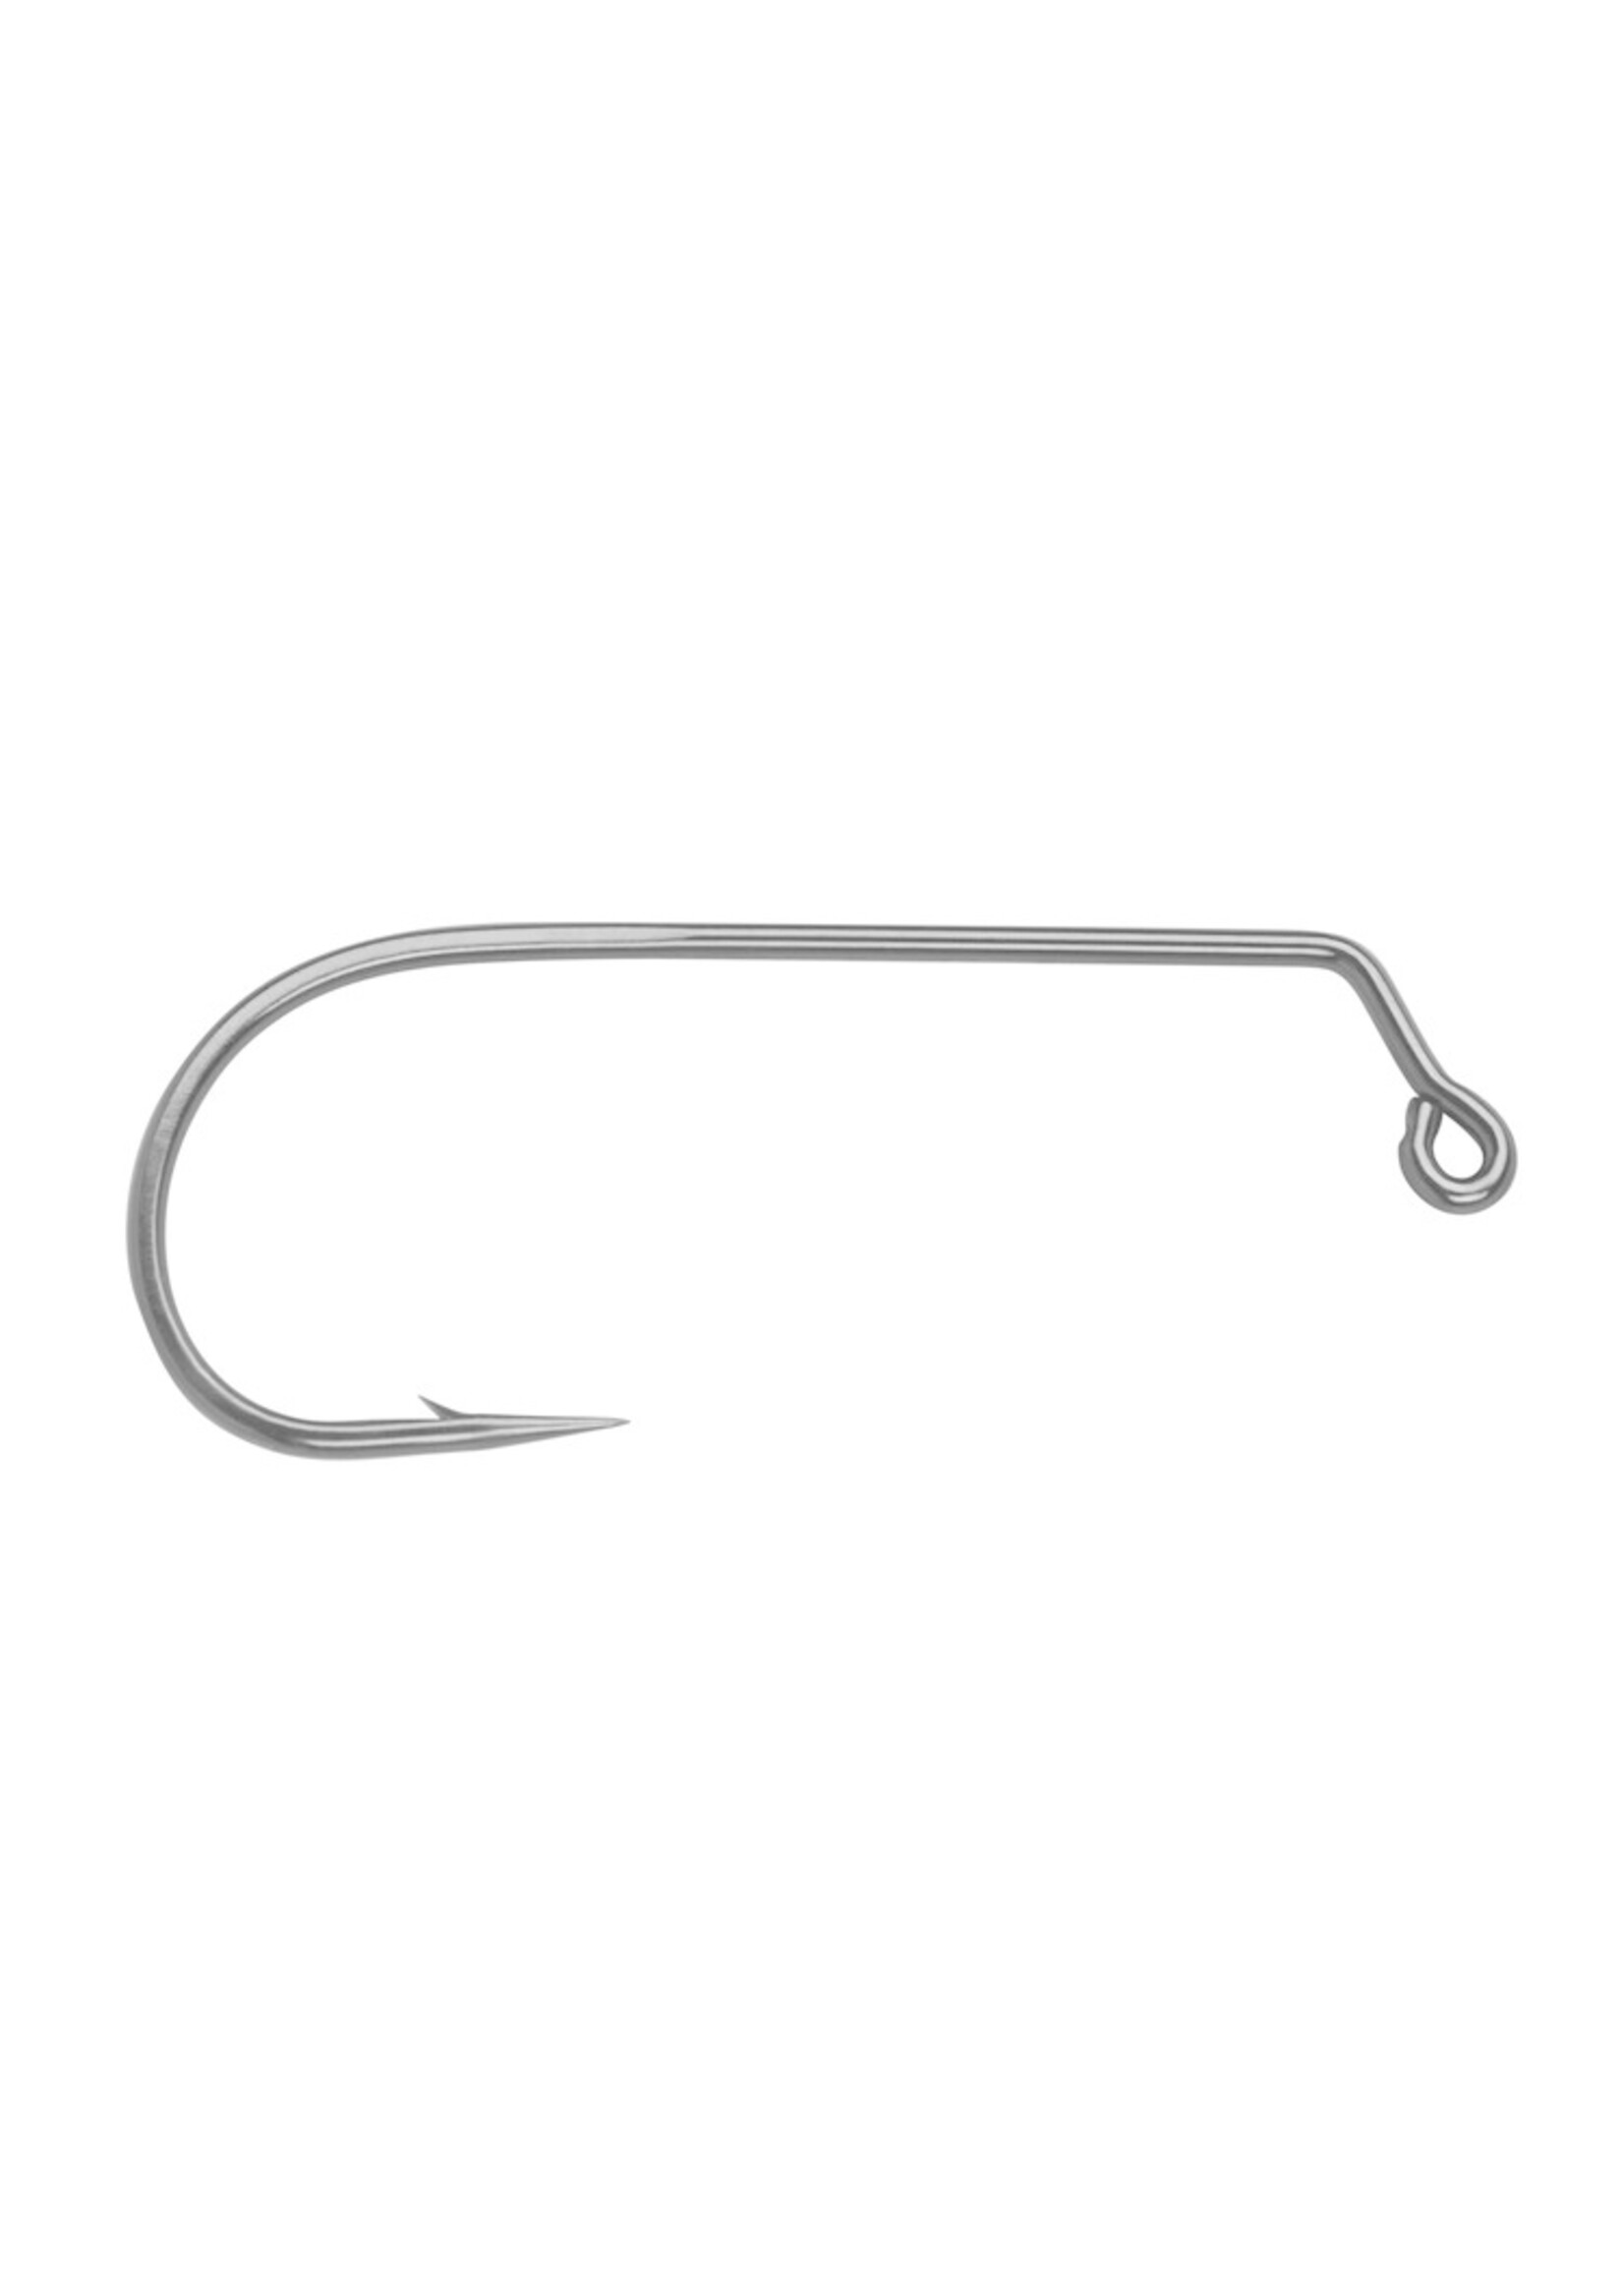 Mustad Heritage Barbless Nymph Jig Fly Hook - J60 - Tackle Shack